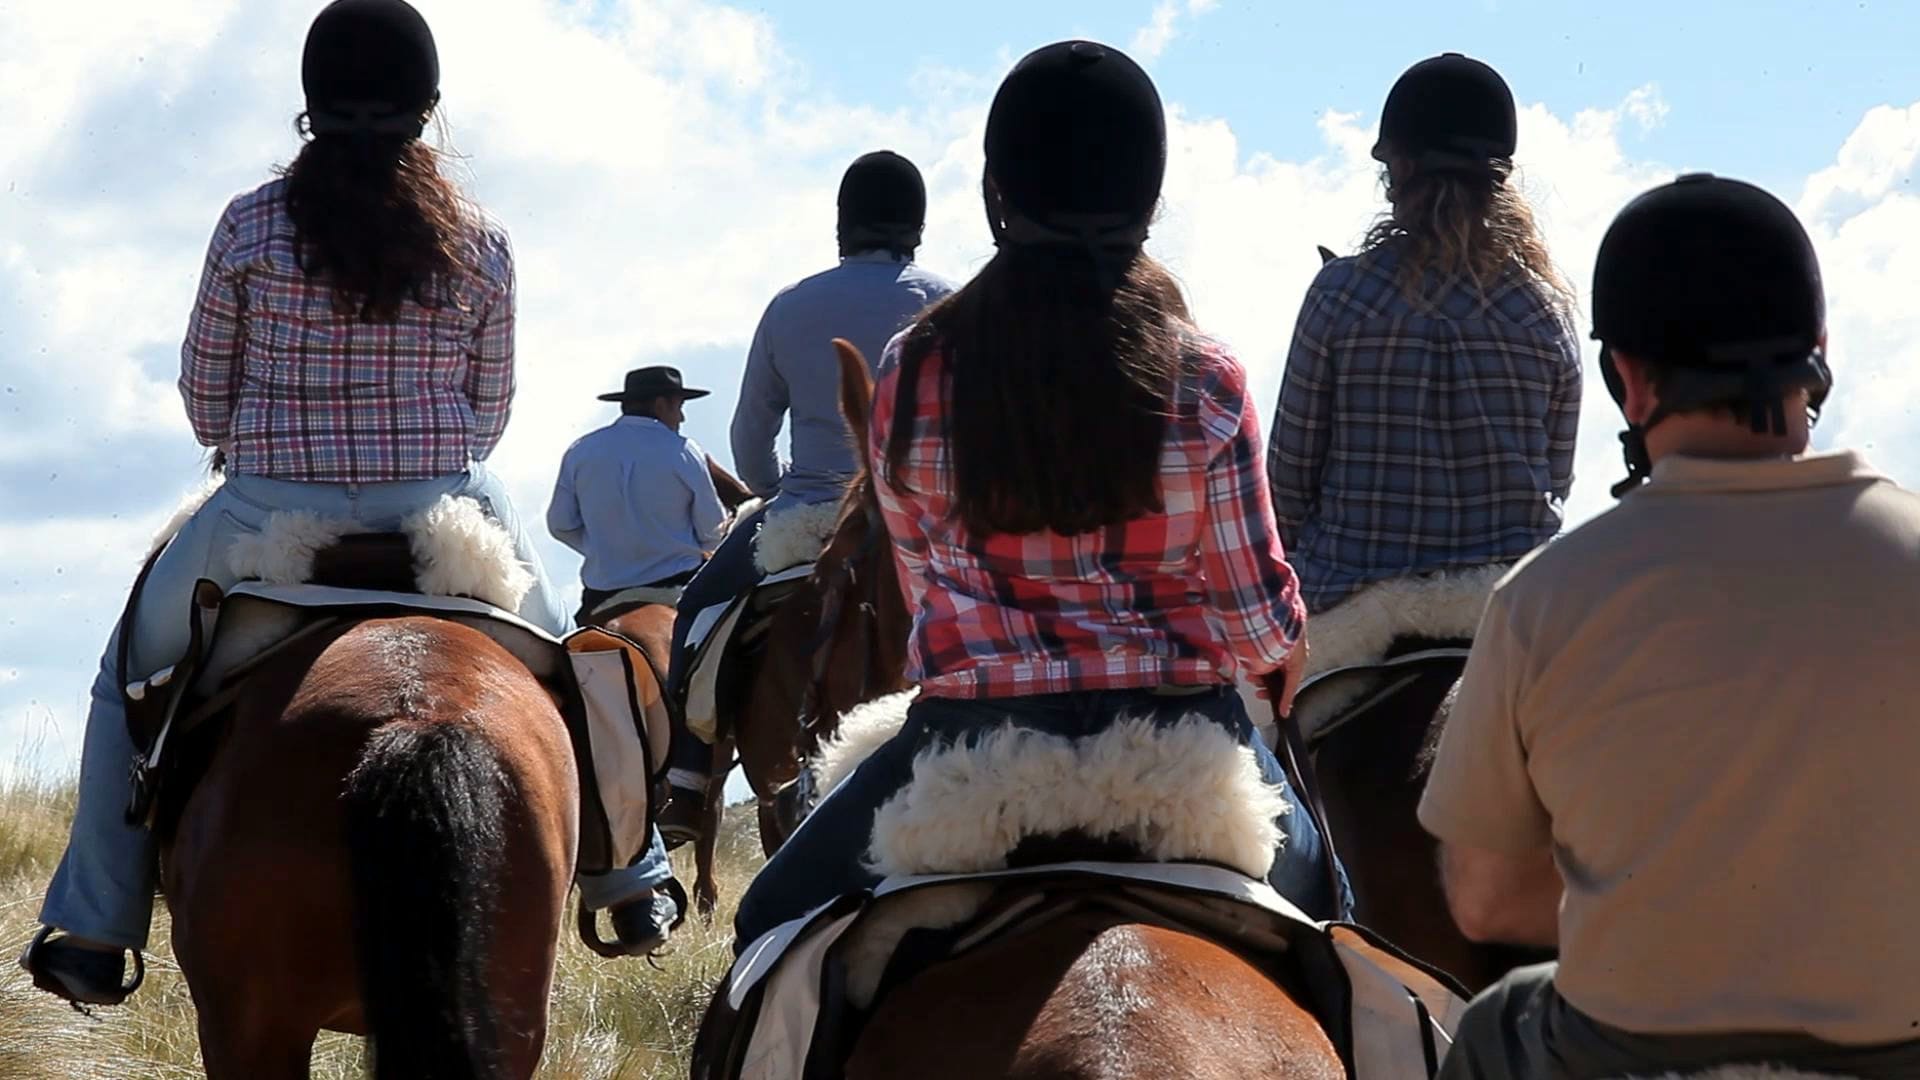 Riders on equestrian route wearing helmets on their heads.